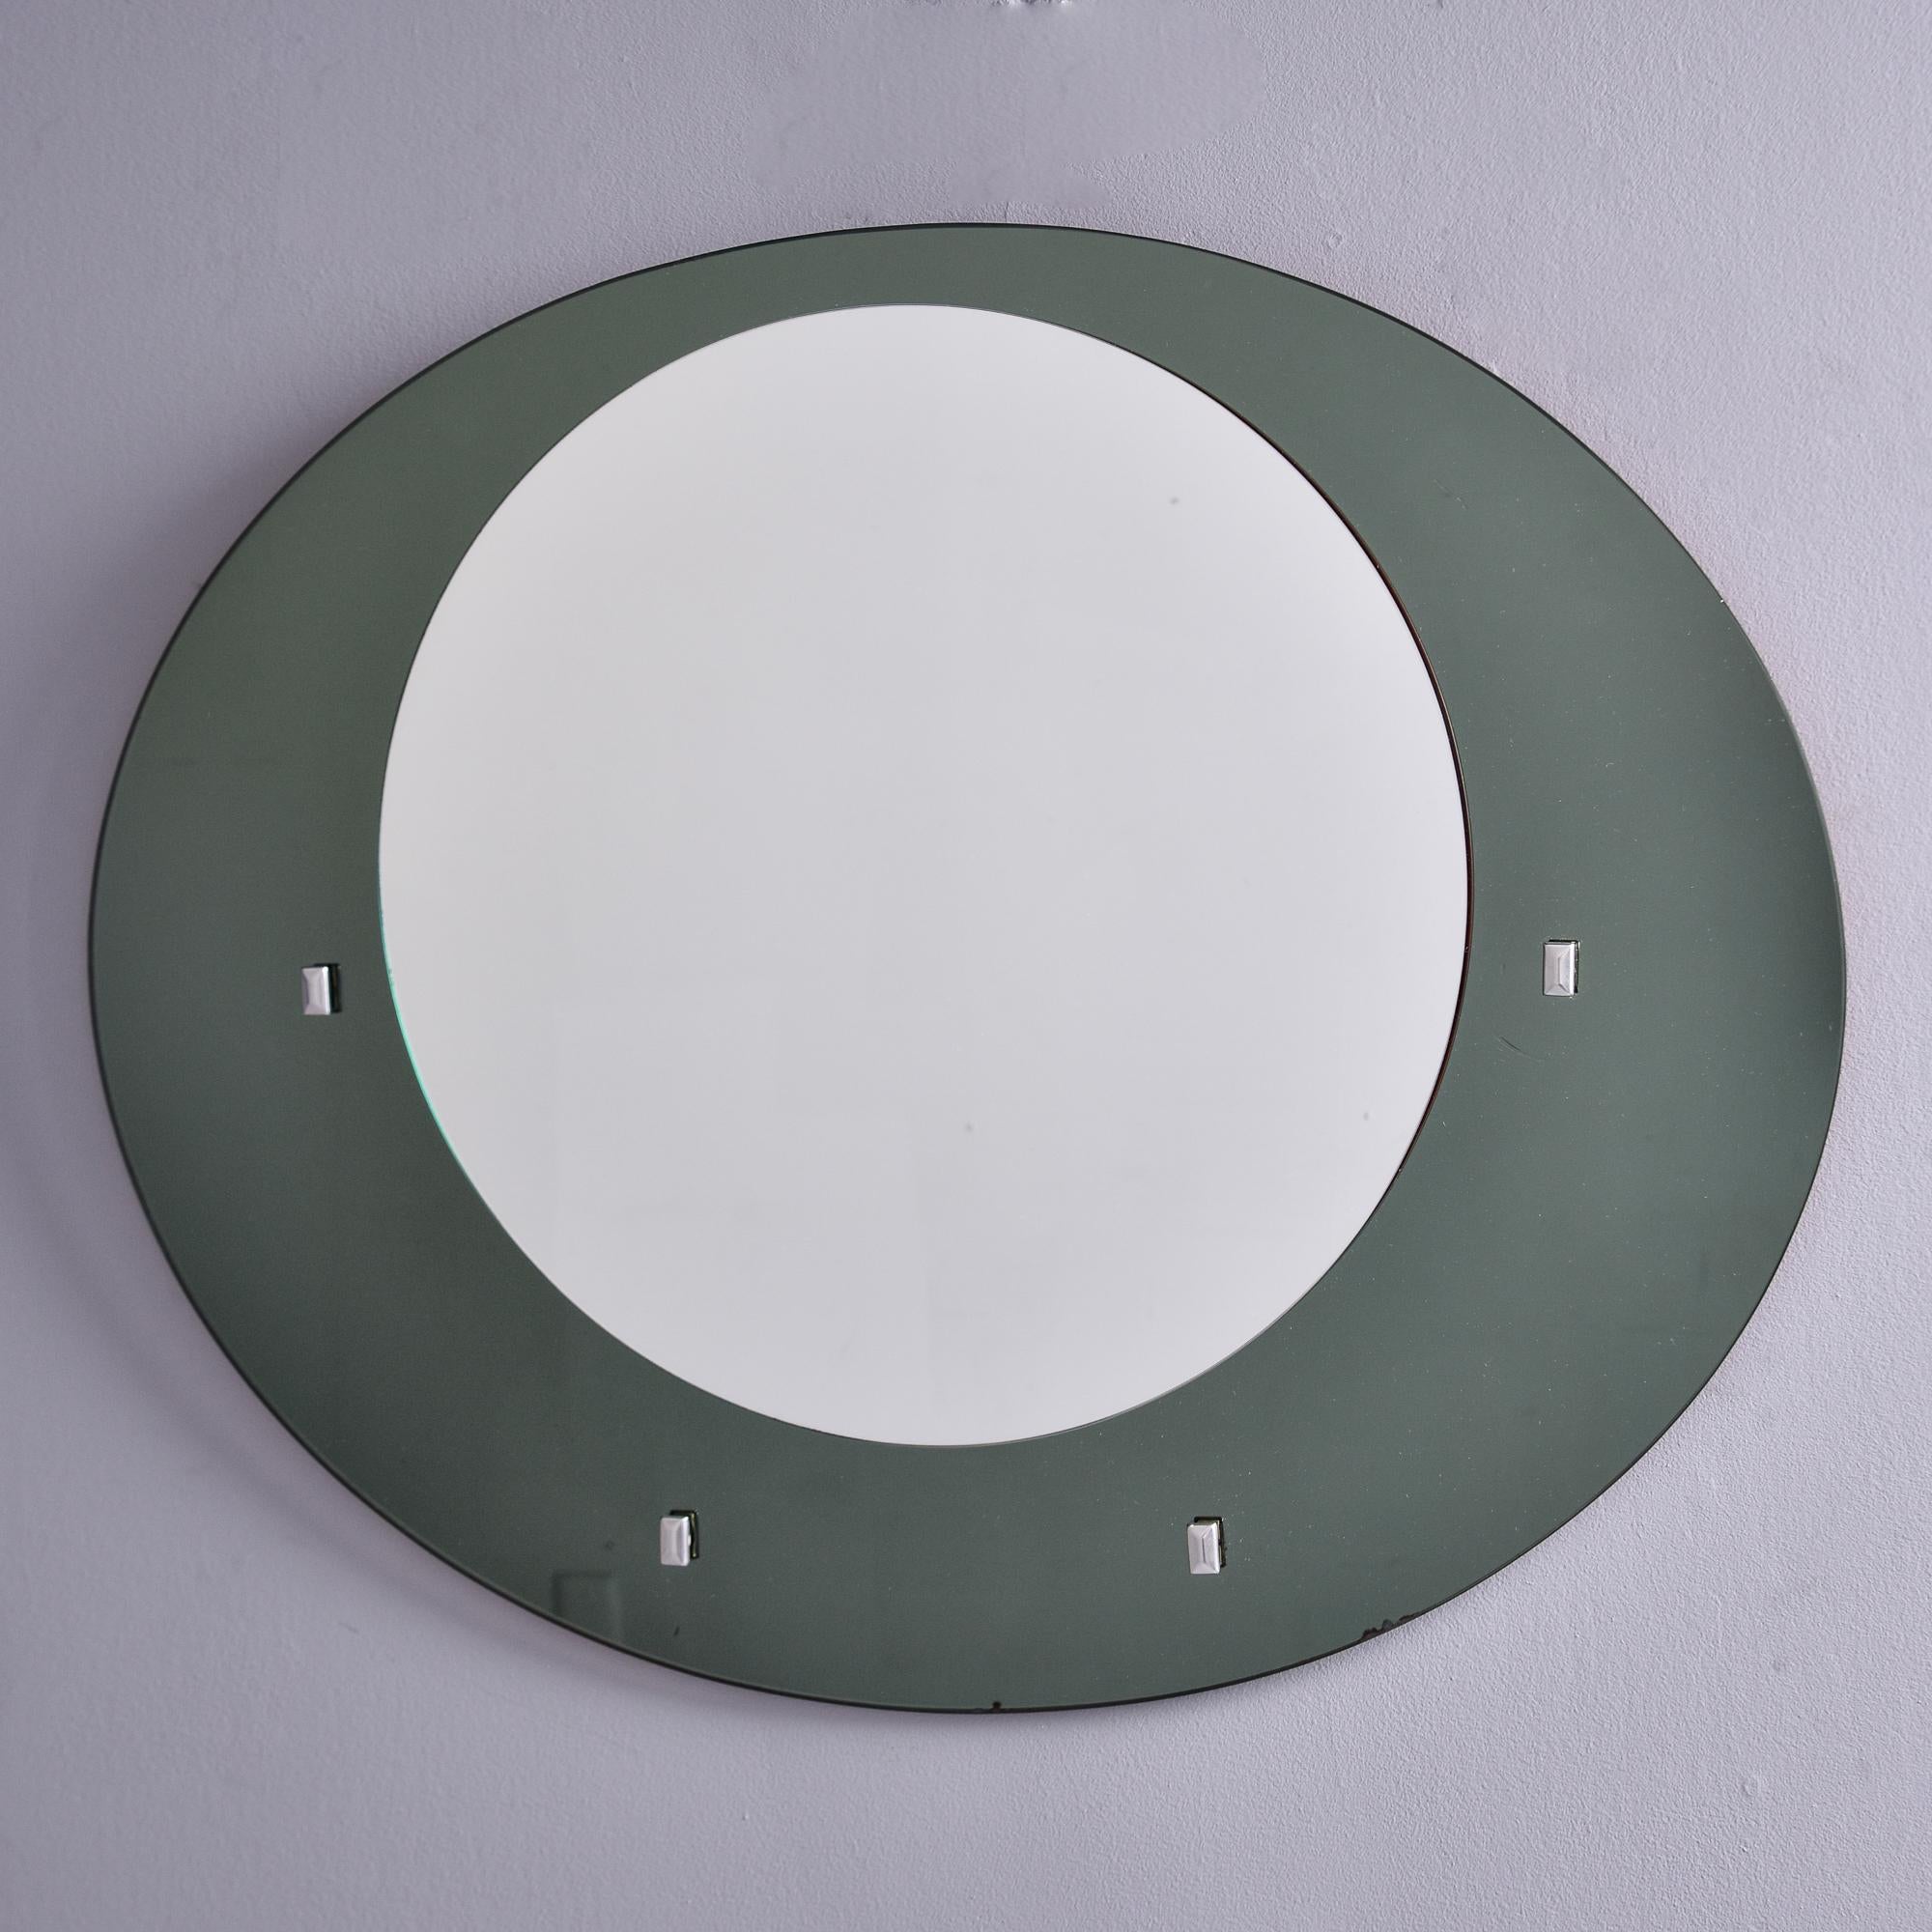 Found in Italy, this round mirror with gray glass frame dates from the late 1960s. Round mirror is set off-center on top of a gray glass oval frame. Rectangular silver tone metal accents. Metal hanger on back. This mirror is in the style of Fontana